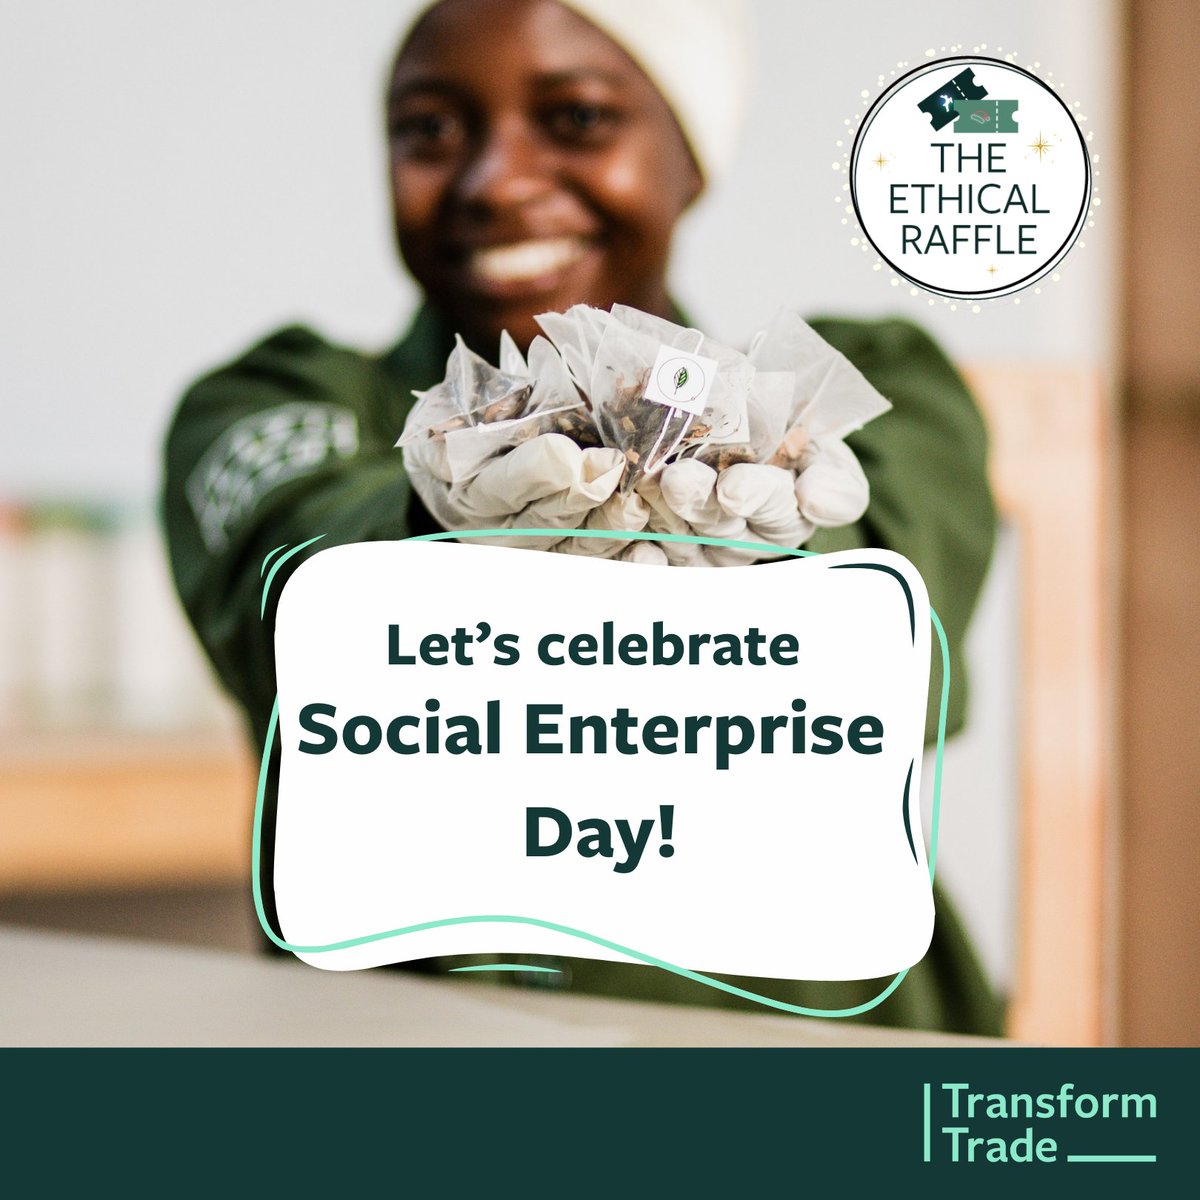 🌍 Happy #SocialEnterpriseDay! Today, we celebrate businesses making a positive impact. Support ethical trade by entering our Ethical Raffle for a chance to win exclusive prizes from orgs that prioritise people and the planet. Get your tickets now! 🥳 transform-trade.org/raffle